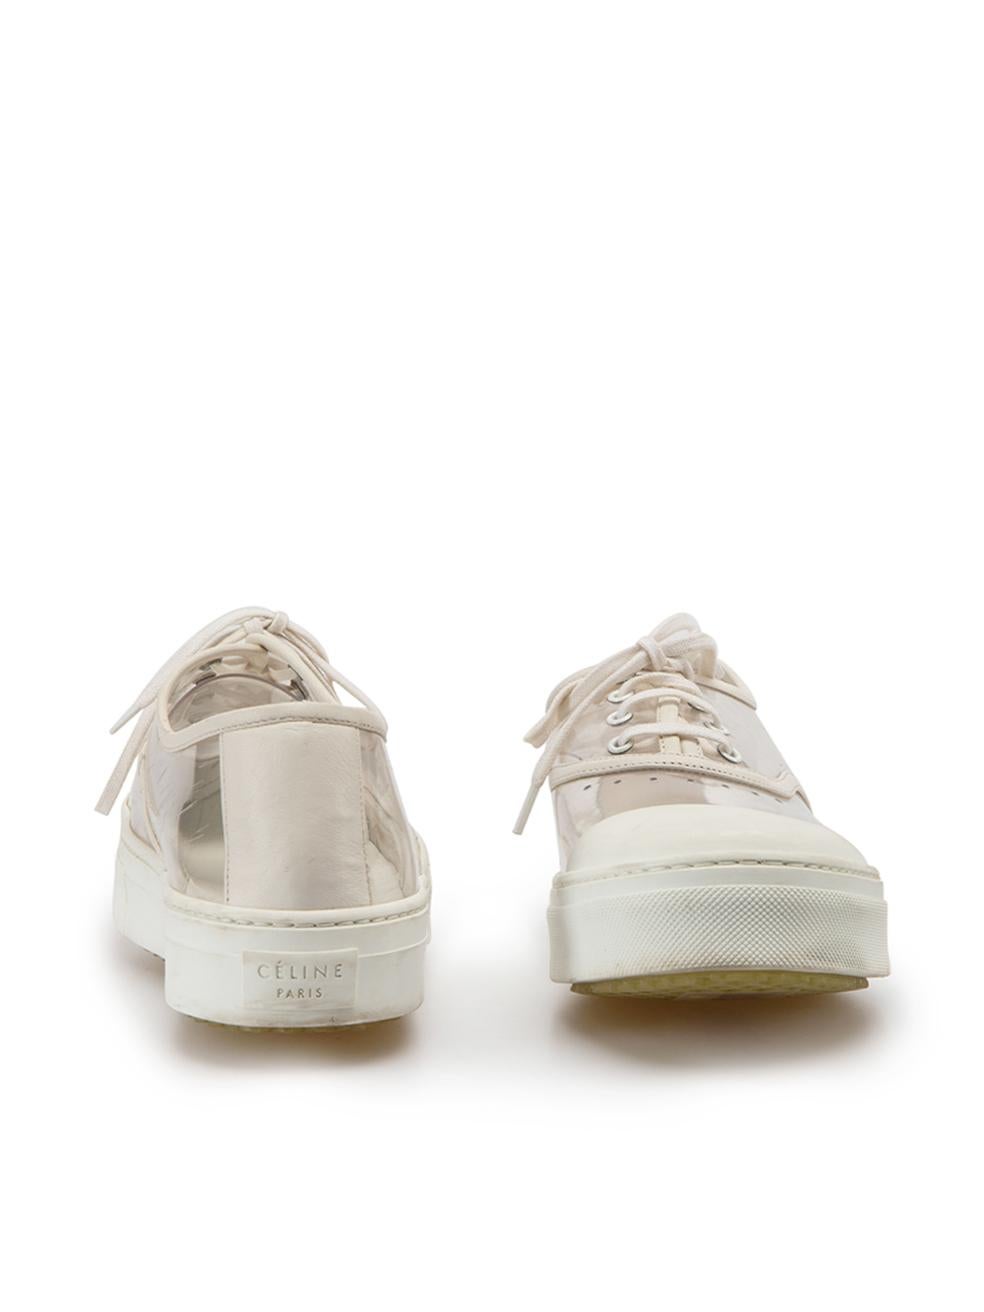 Céline Women's White Transparent PVC Panel Low Trainers In Good Condition For Sale In London, GB